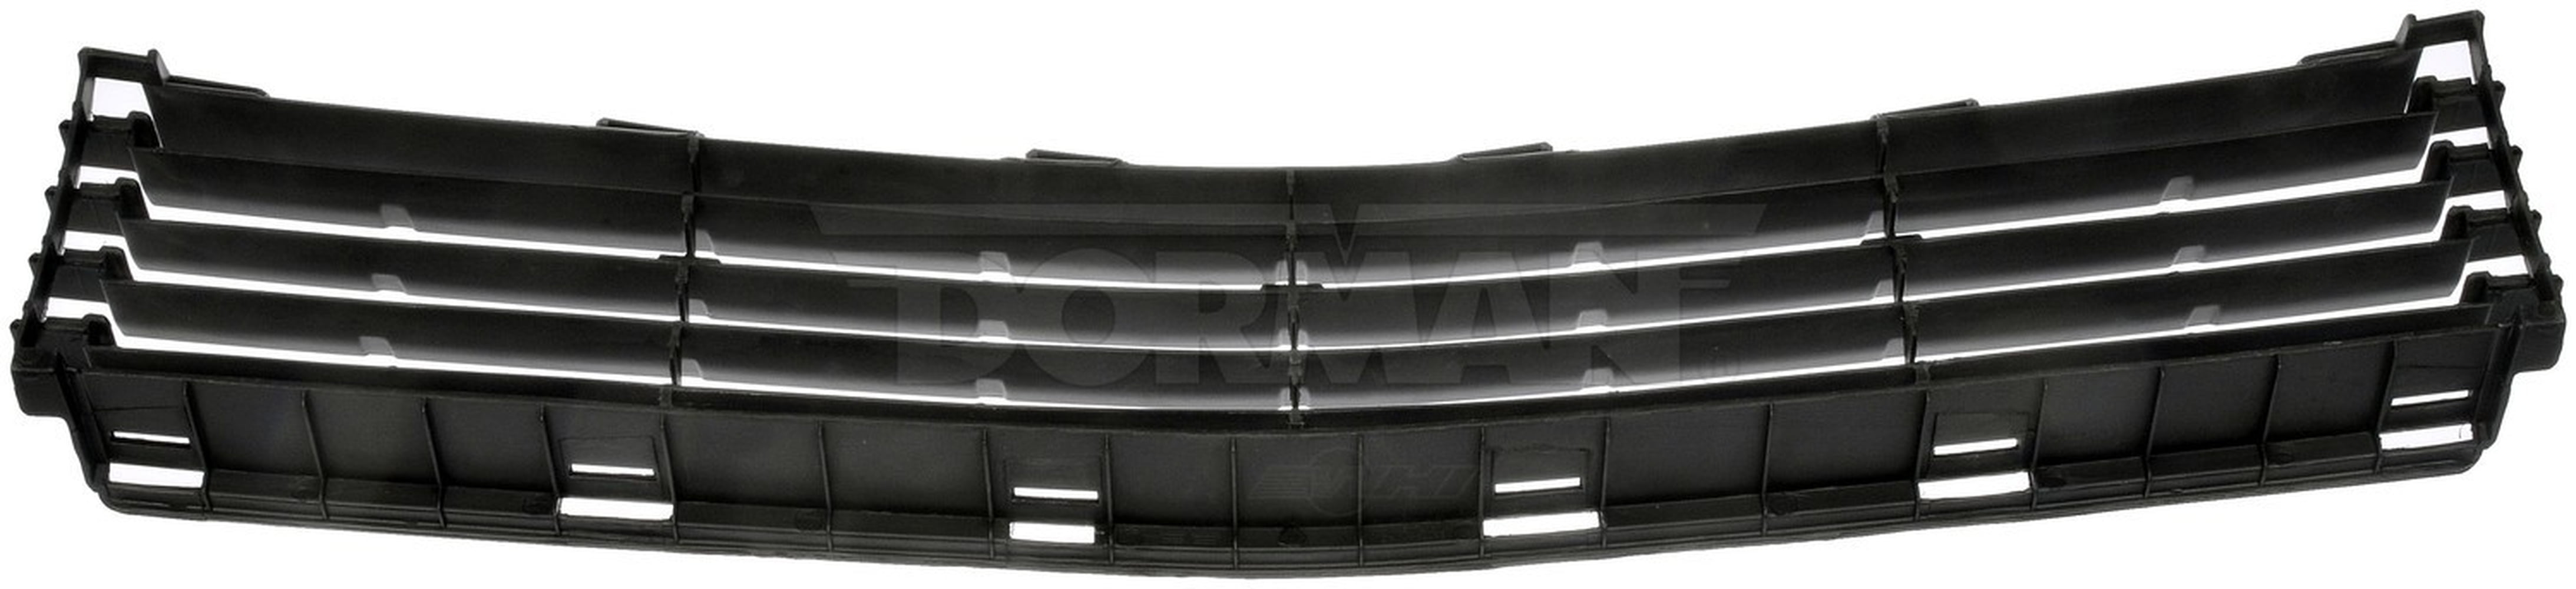 Dorman 45172 Front Center Bumper Grille Insert Compatible with Select Toyota Models 